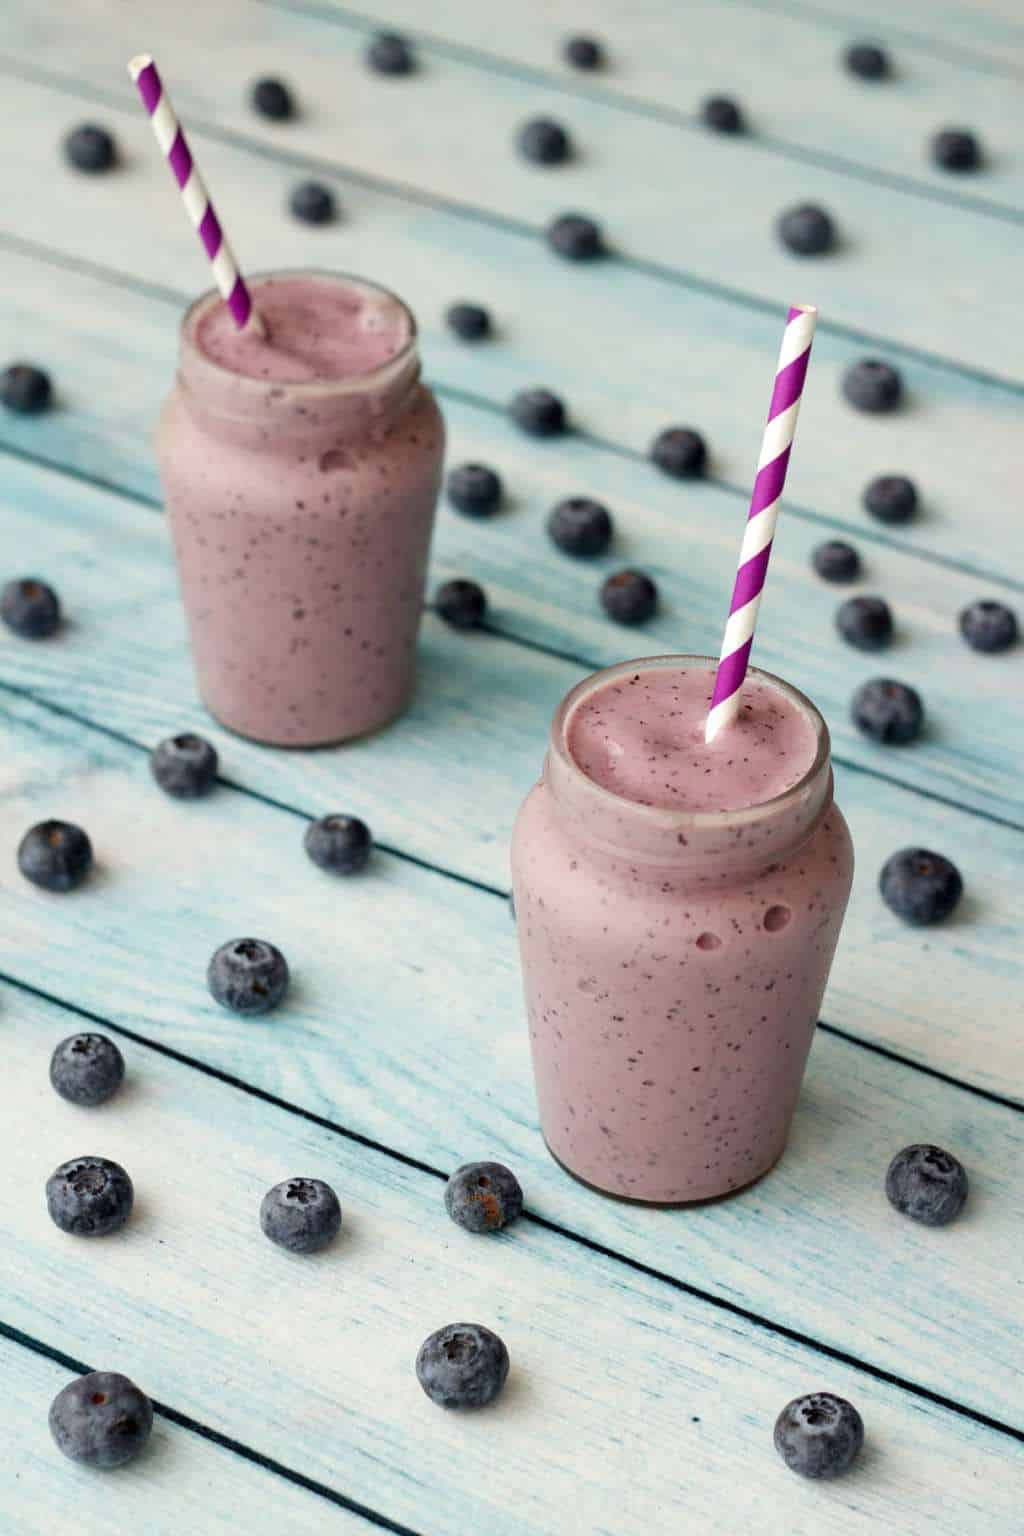 Blueberry Smoothie with Cashew Nut Milk and Bananas